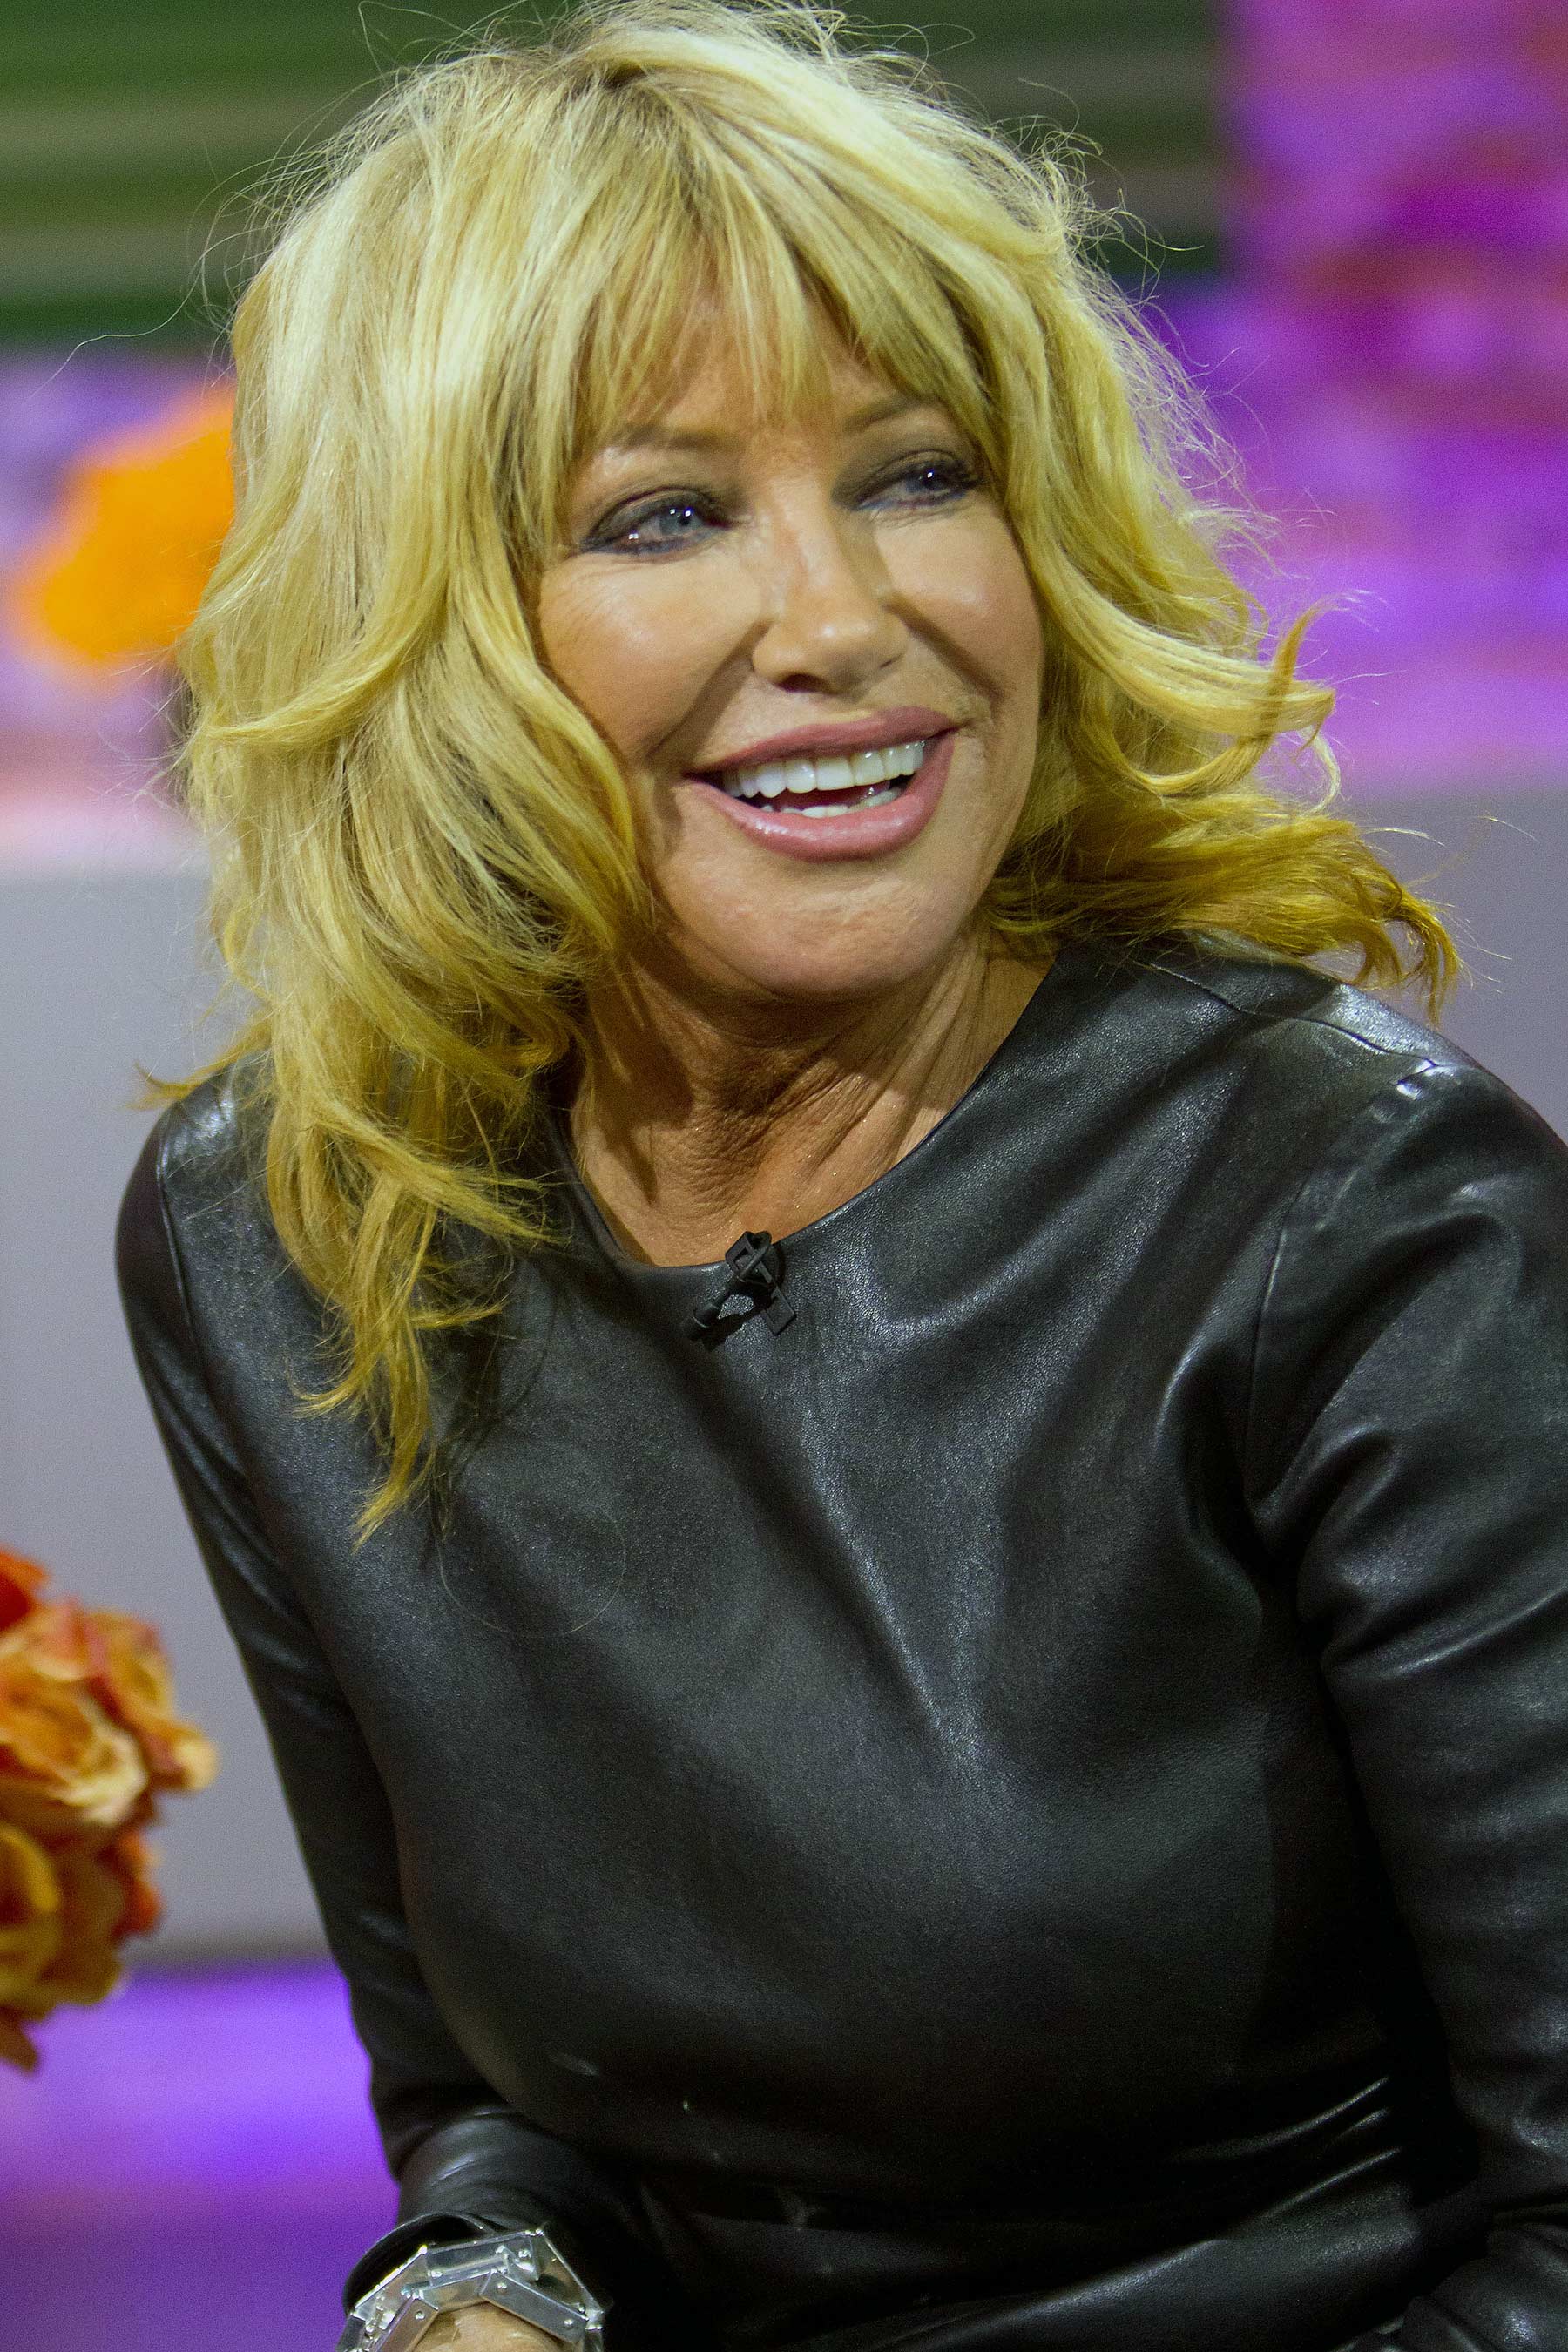 Suzanne Somers appears on The Marilyn Denis Show